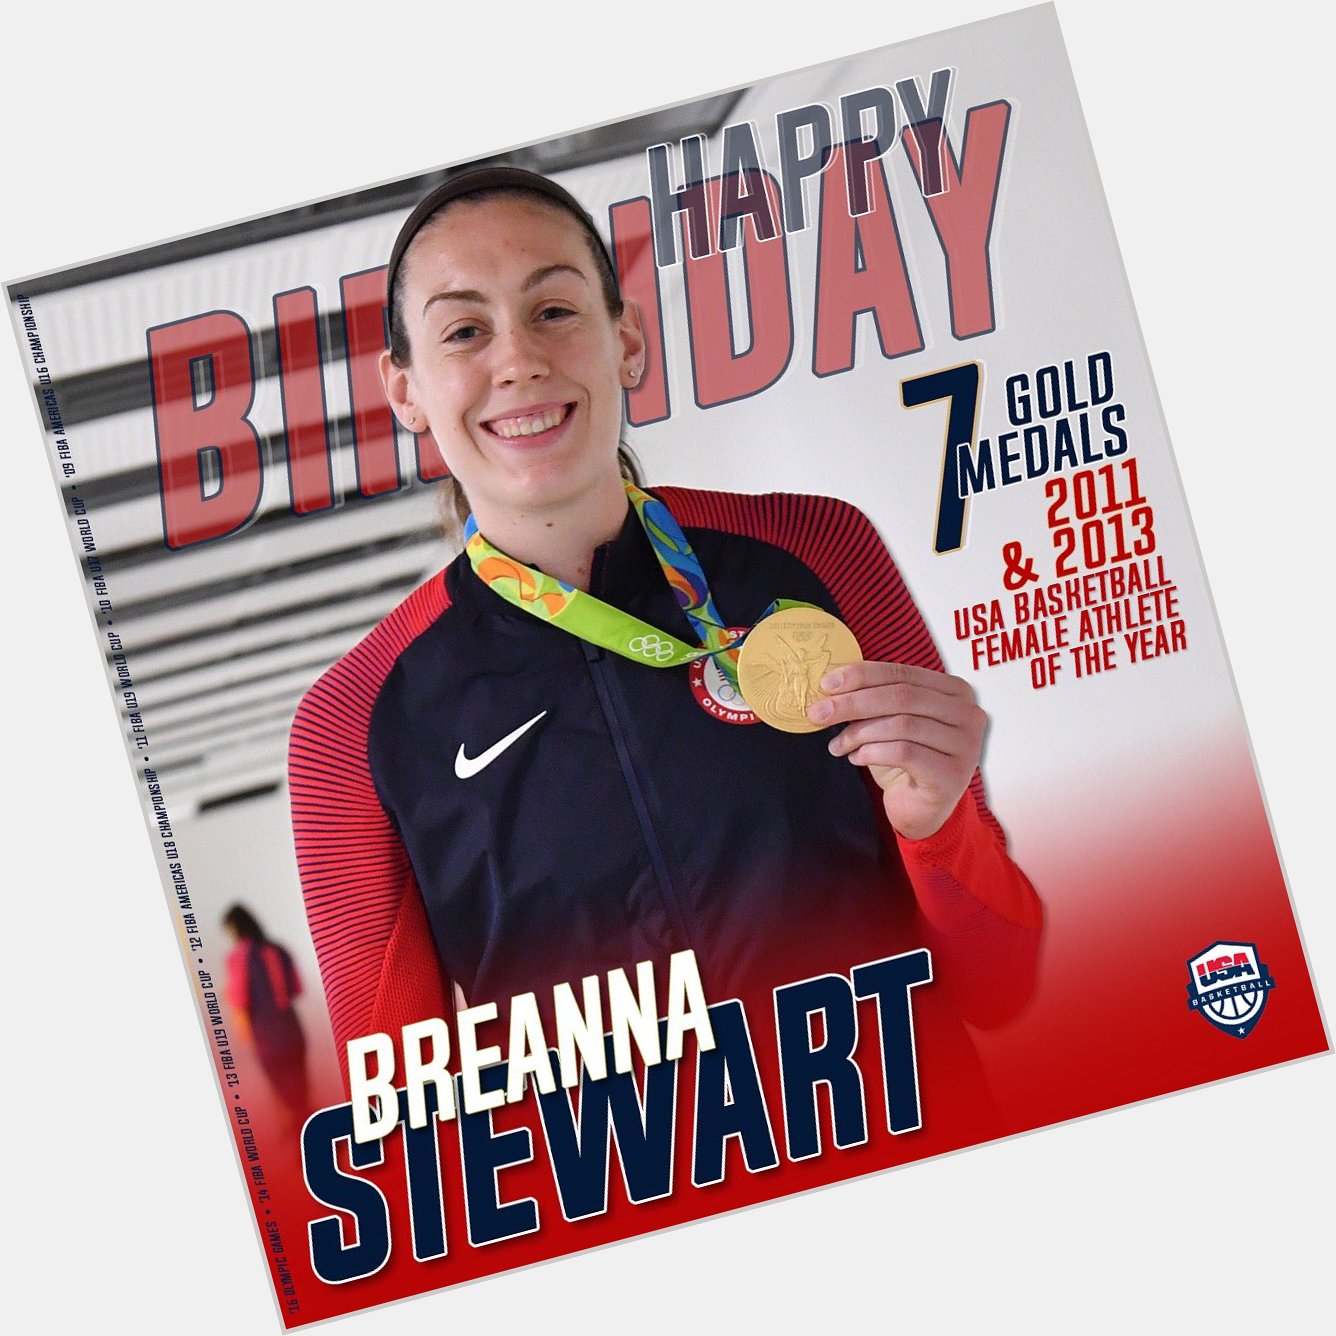 Join us in wishing a happy birthday to Breanna Stewart & Kevin Huerter!   